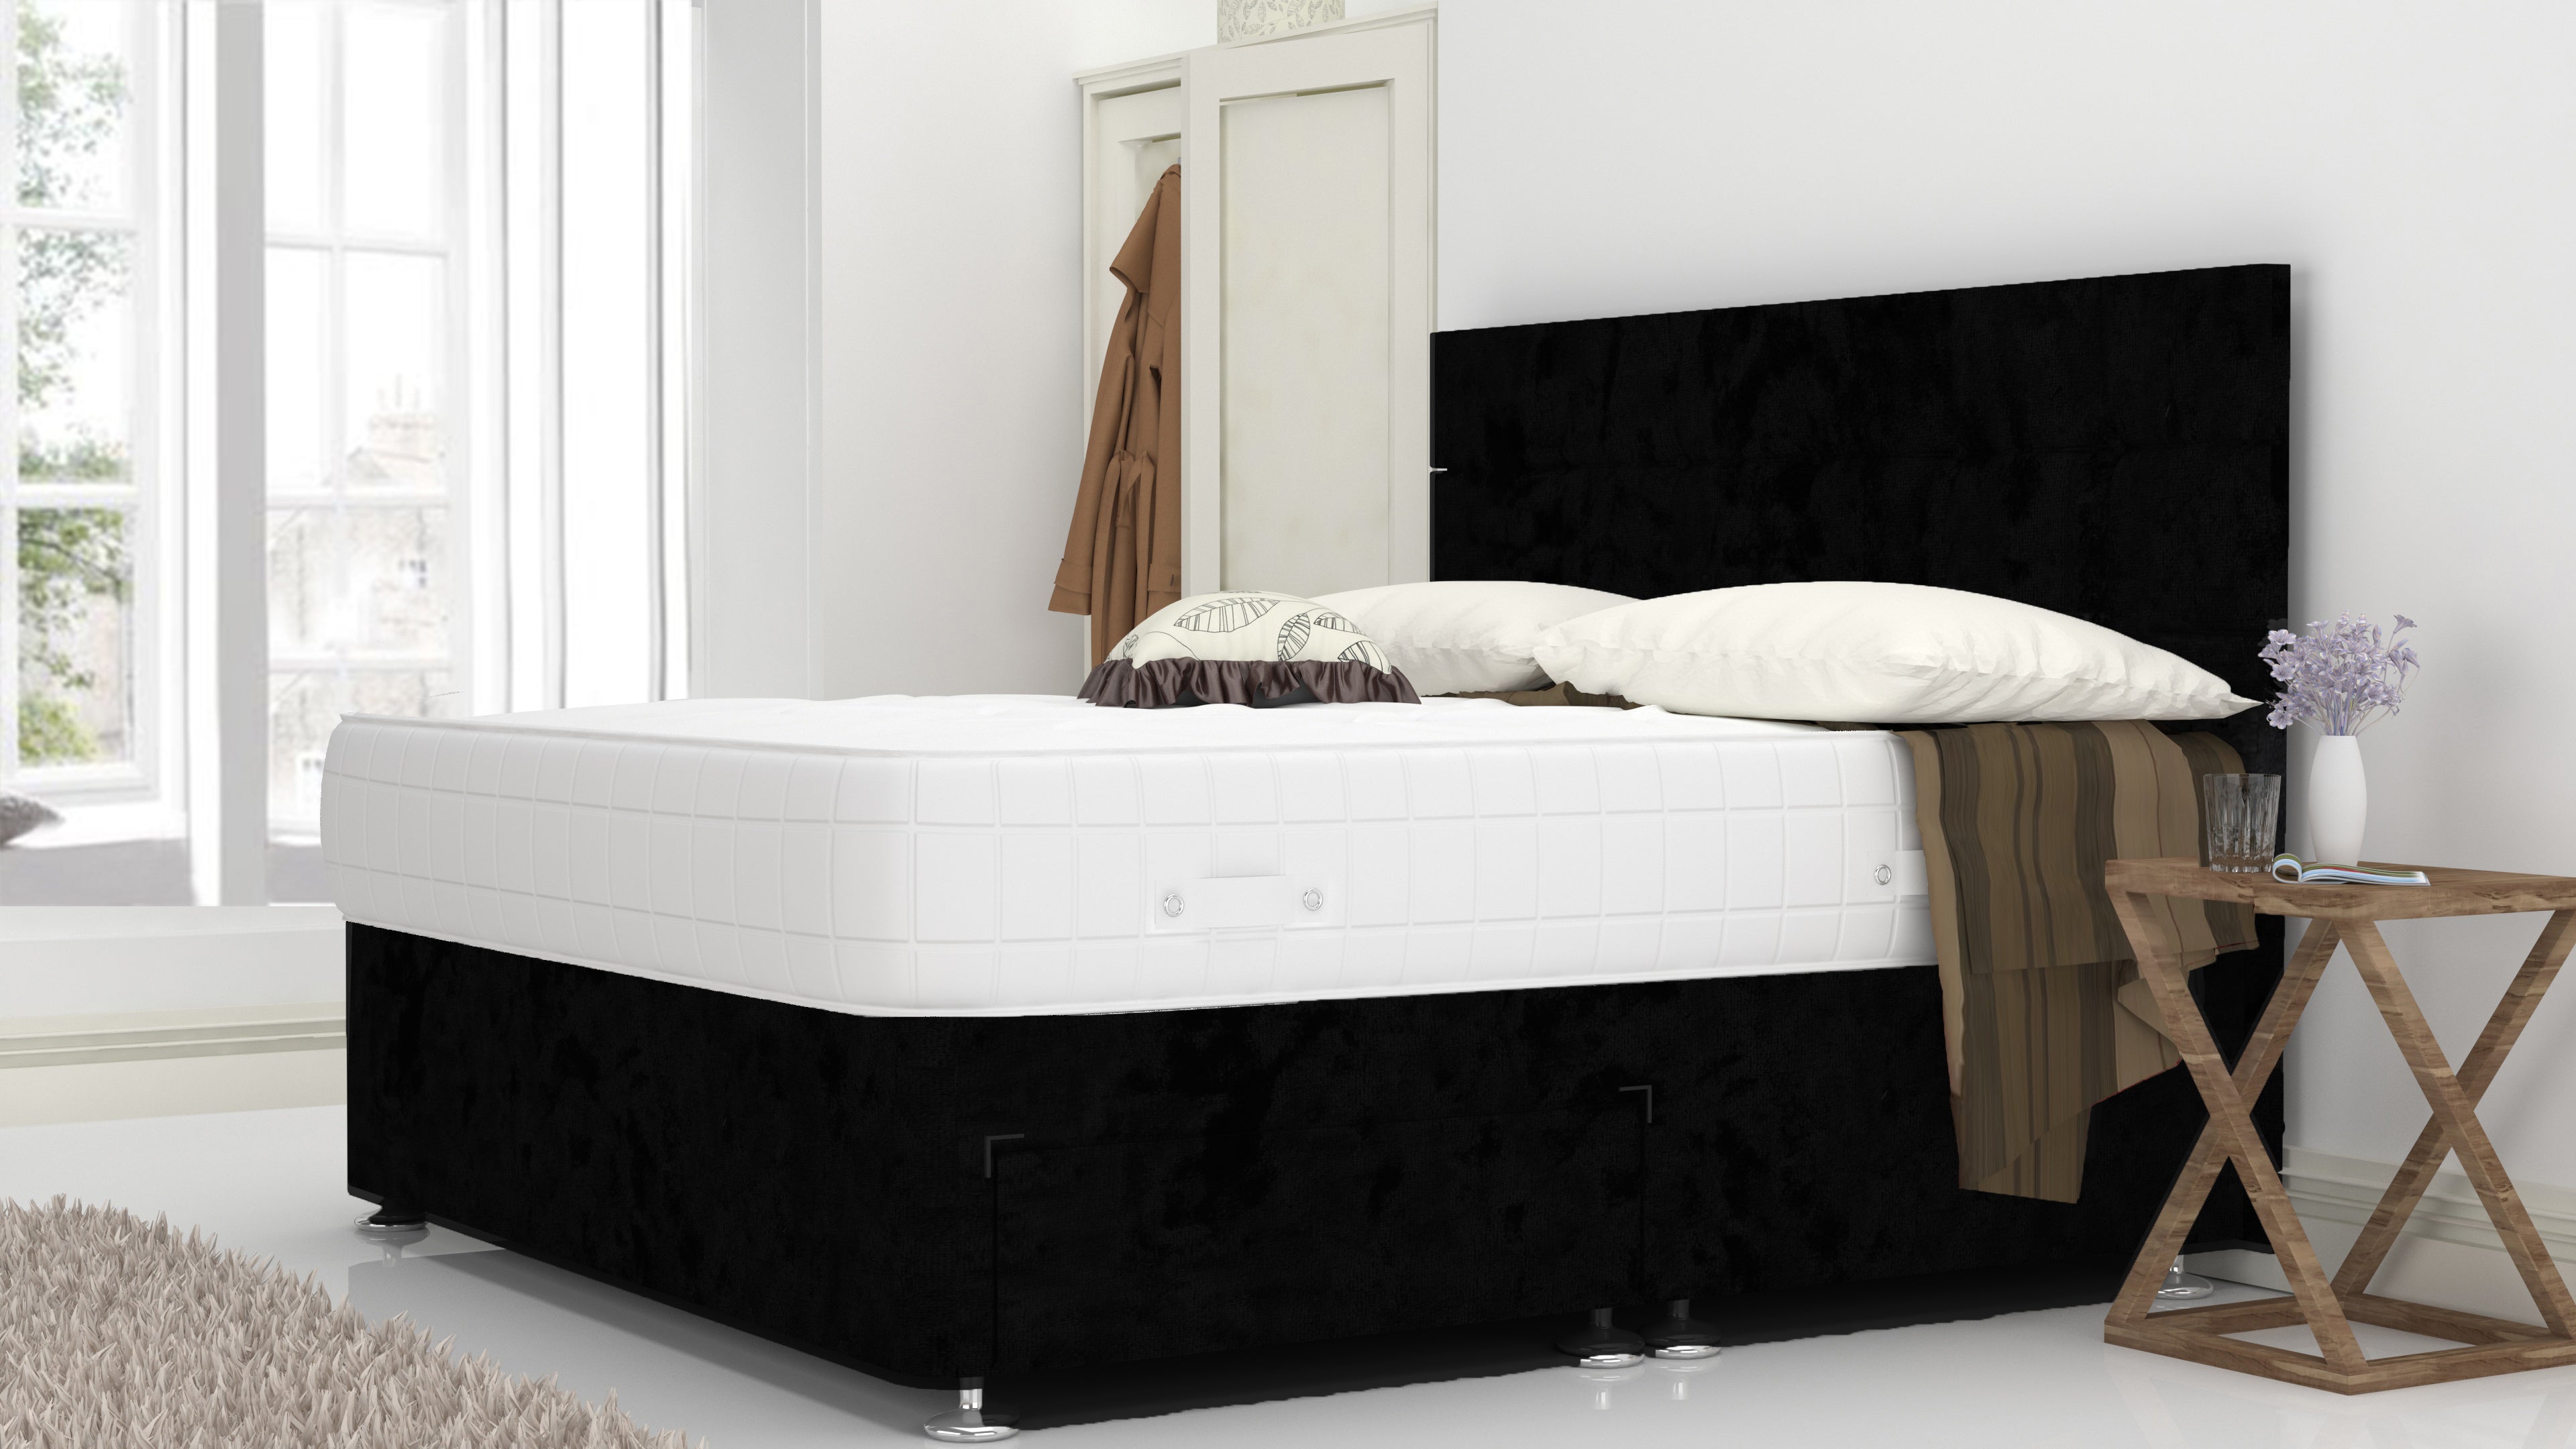 Black Crushed 4 Feet Divan Bed Set With Cube Headboard (Included Feet) And Free Orthopedic Mattress